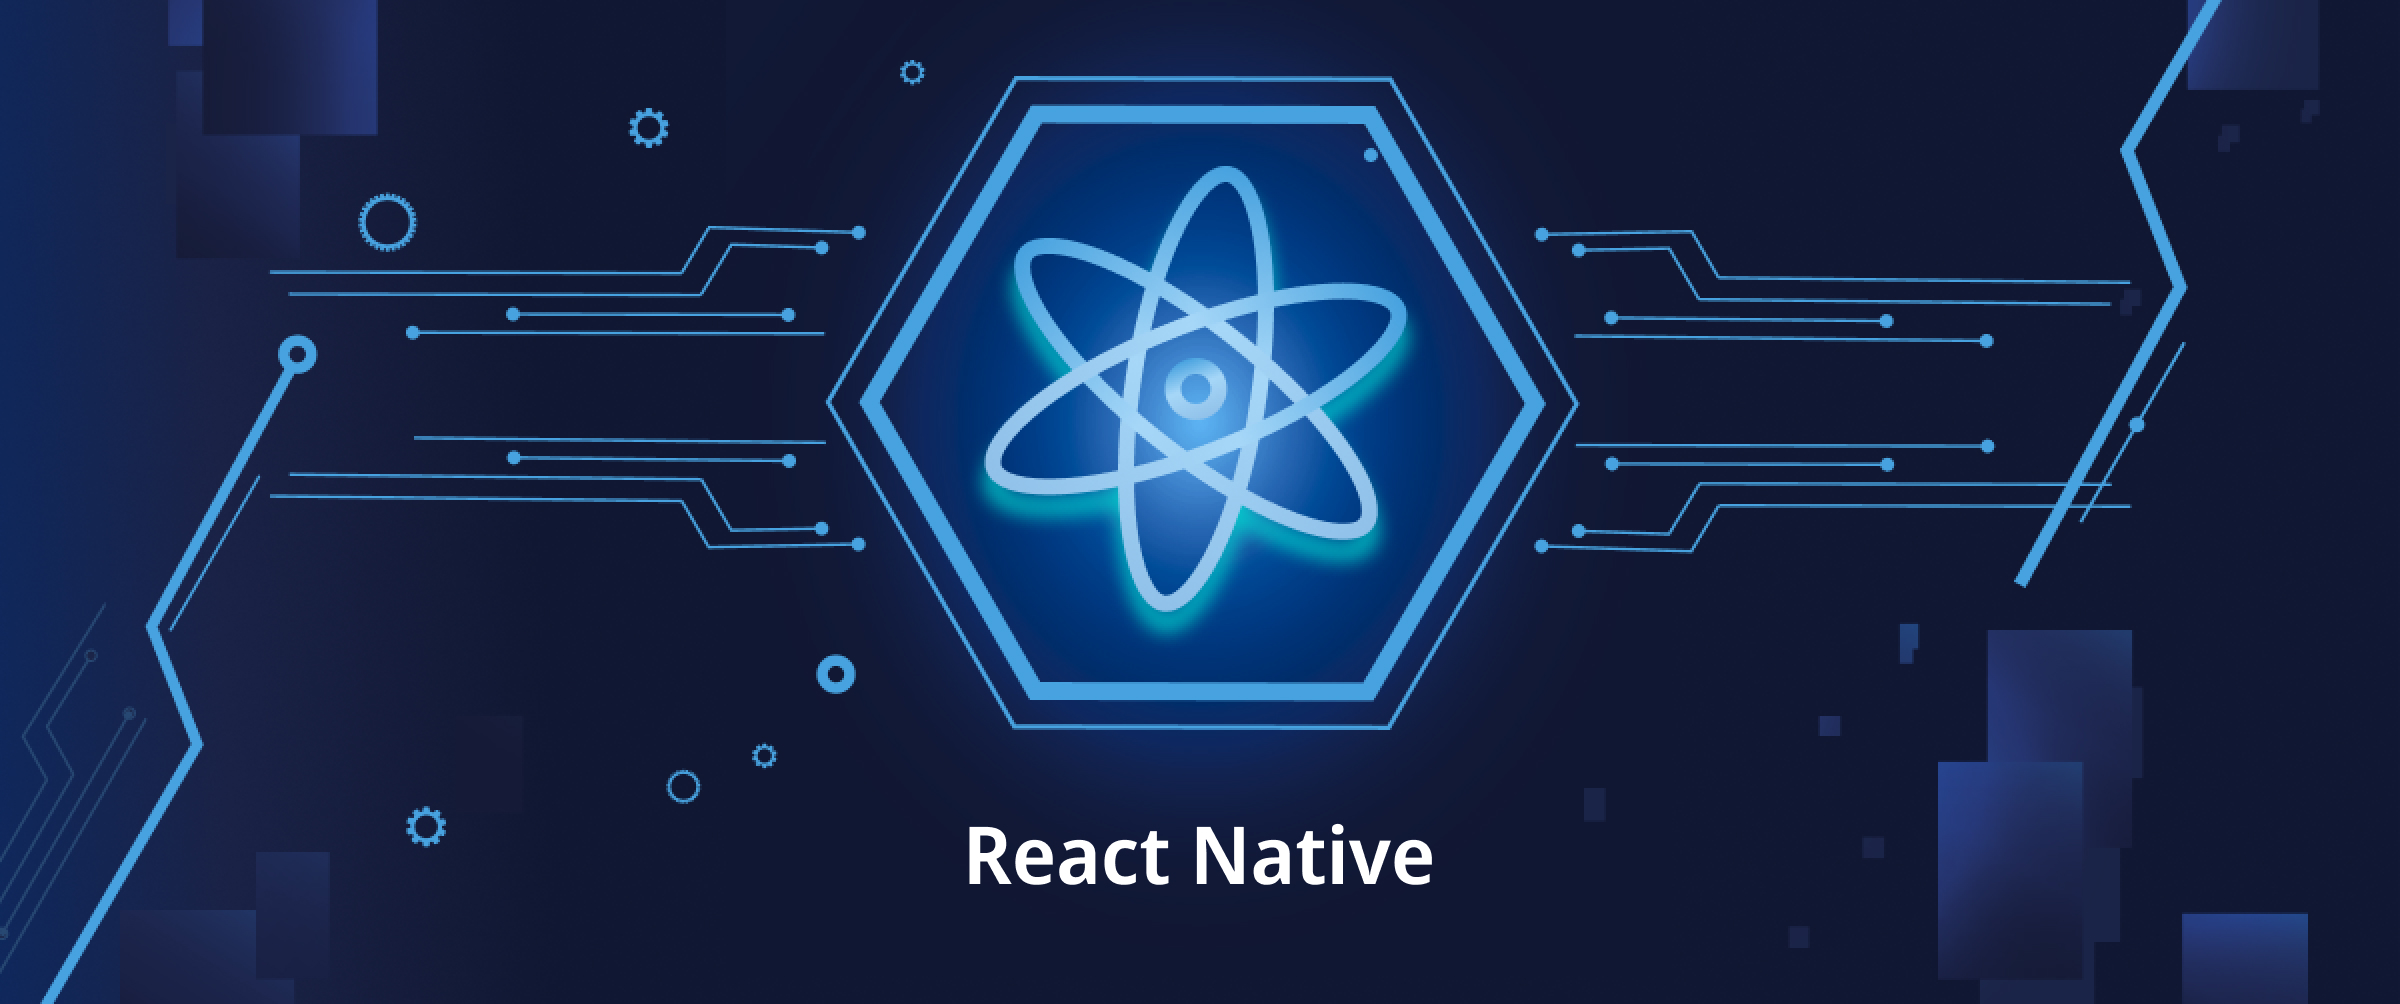 About React Native